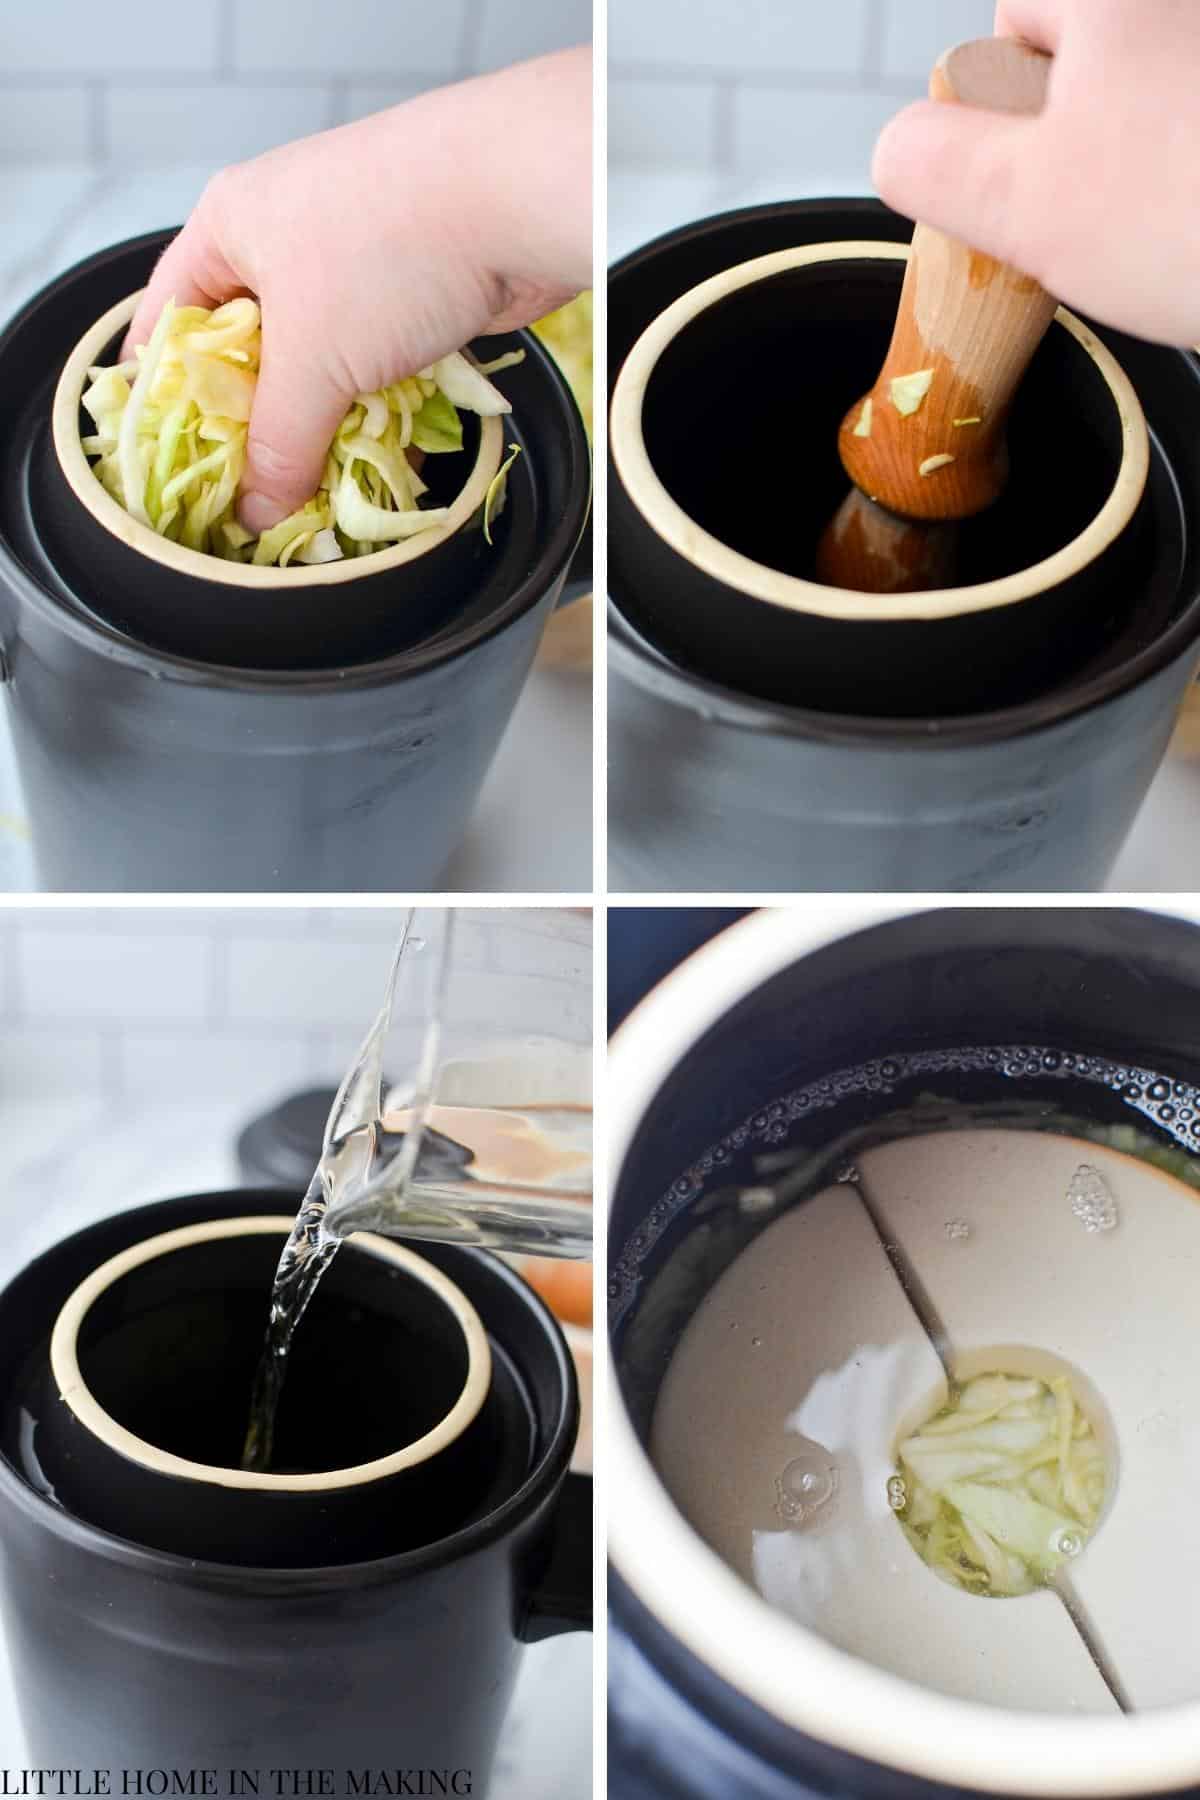 Adding cabbage to a crock and weighing it down for fermentation.